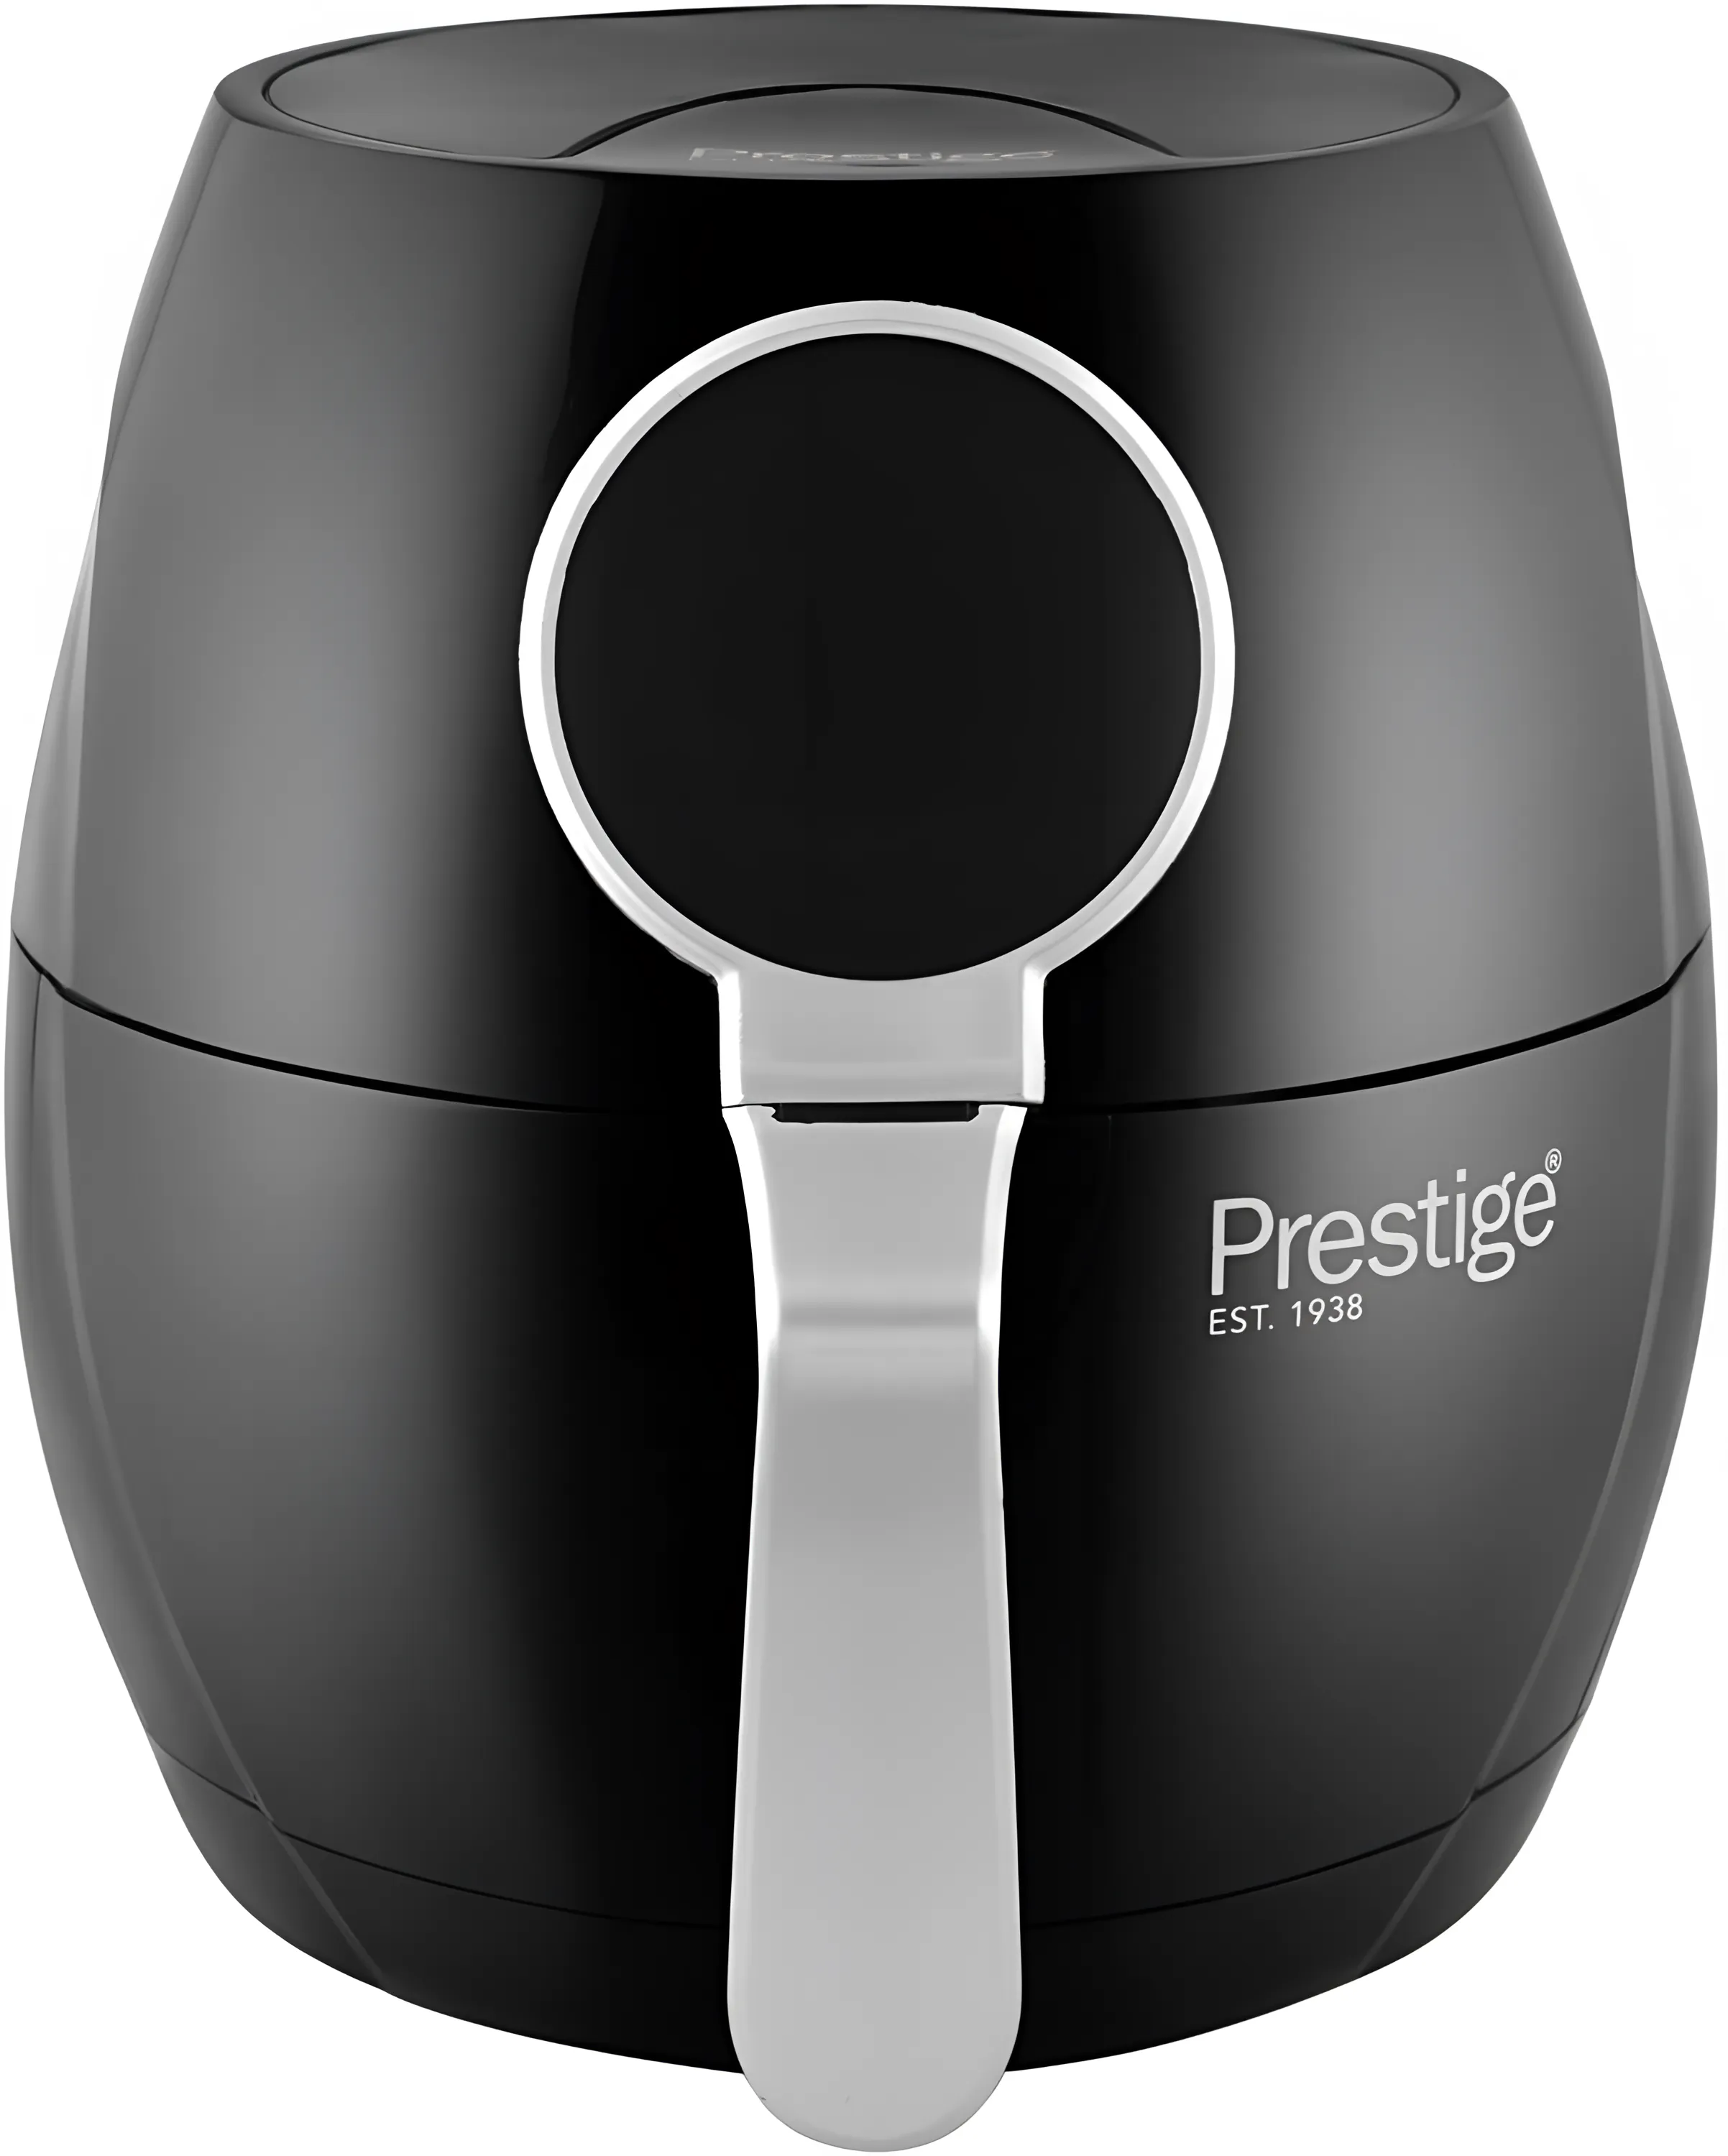 Prestige Digital Air Fryer 3.2 Ltr Best Oil-free fryer for Small Family Air Fryer for Grilling Broiling Roasting Baking & Toasting (Black) 1400 Watts